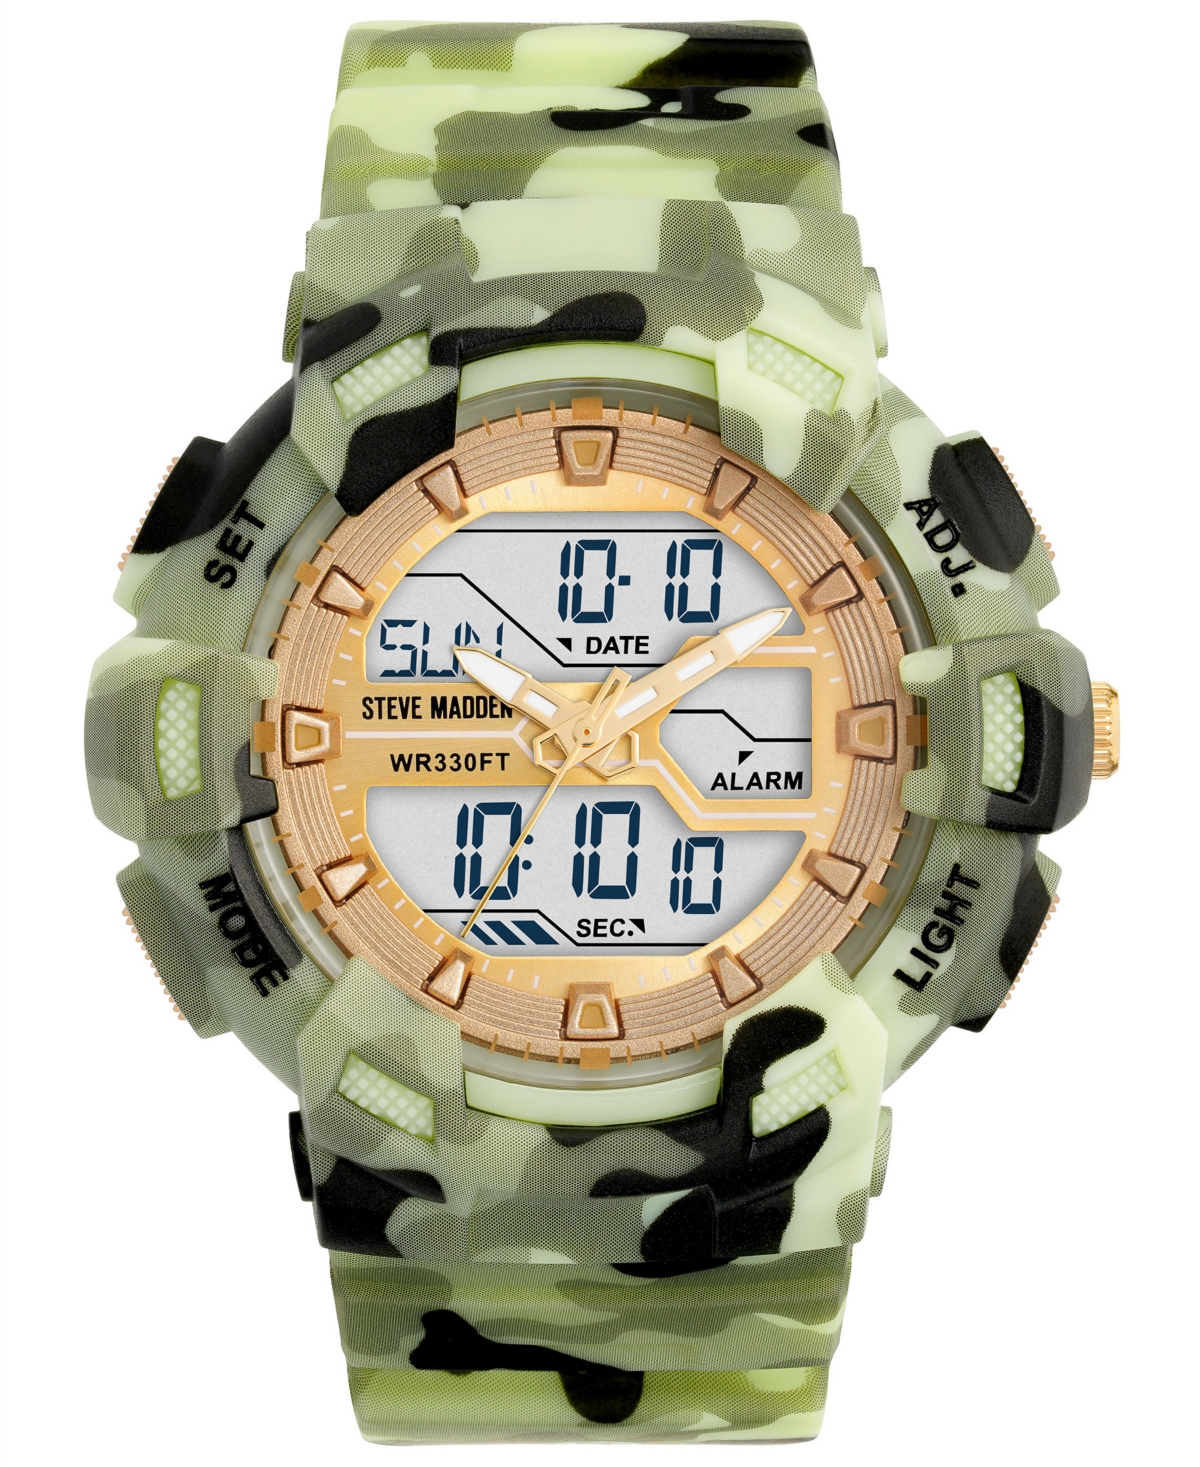 Women's Digital Green Camouflage Pattern Silicone Band Watch, 51mm - Green, Gold-Tone